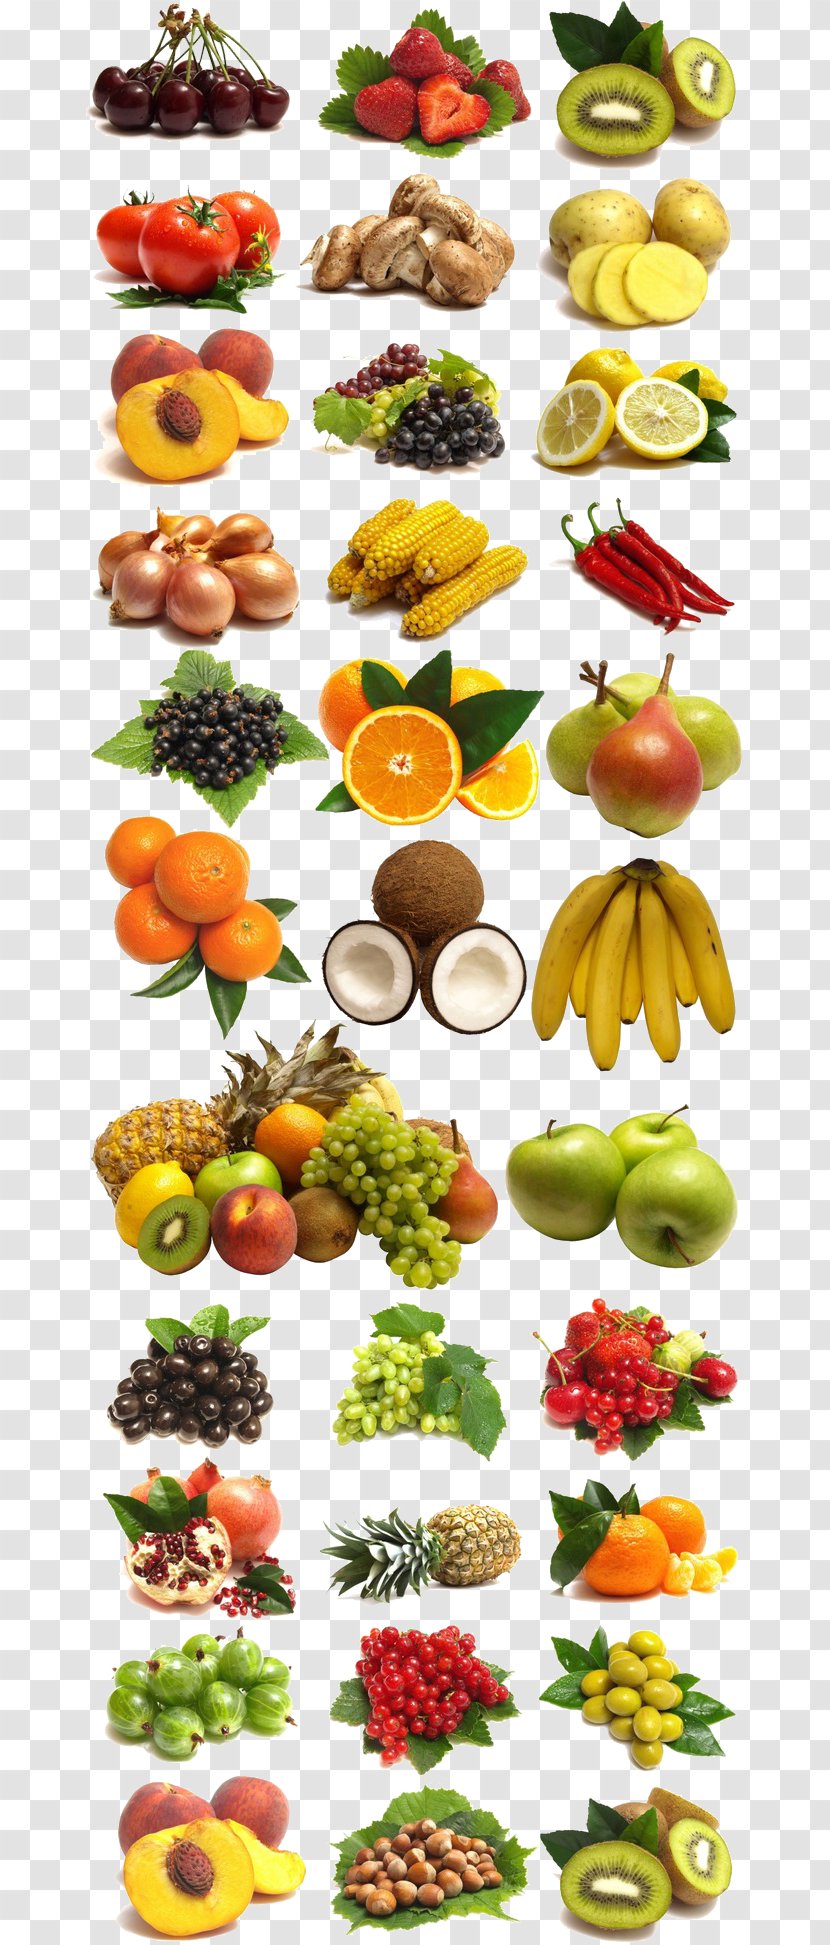 A Large Collection Of Fruits And Vegetables - Vegetarian Food - Diabetes Mellitus Transparent PNG